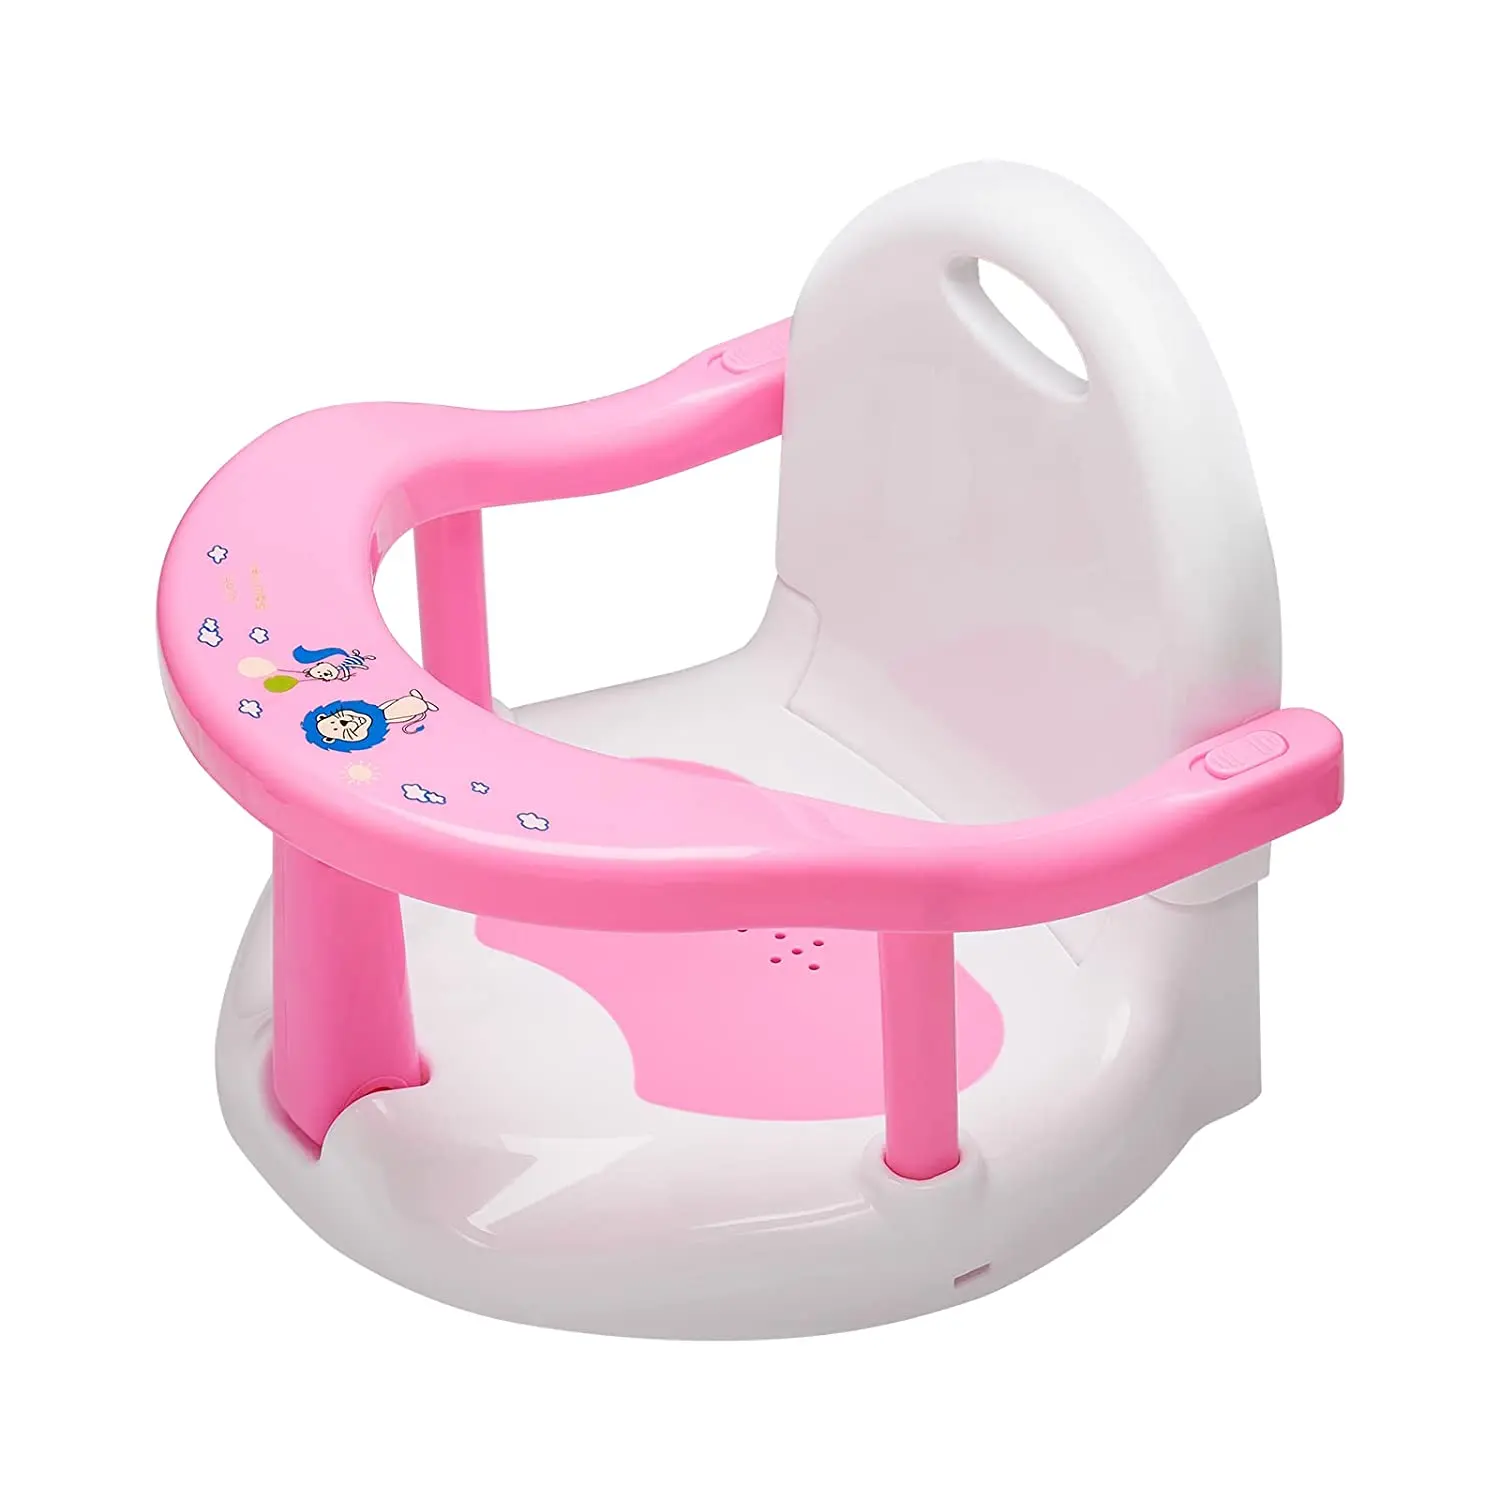 Factory supplier foldable non-slip baby bath seat for babies with non-slip mat and suction cups for stability